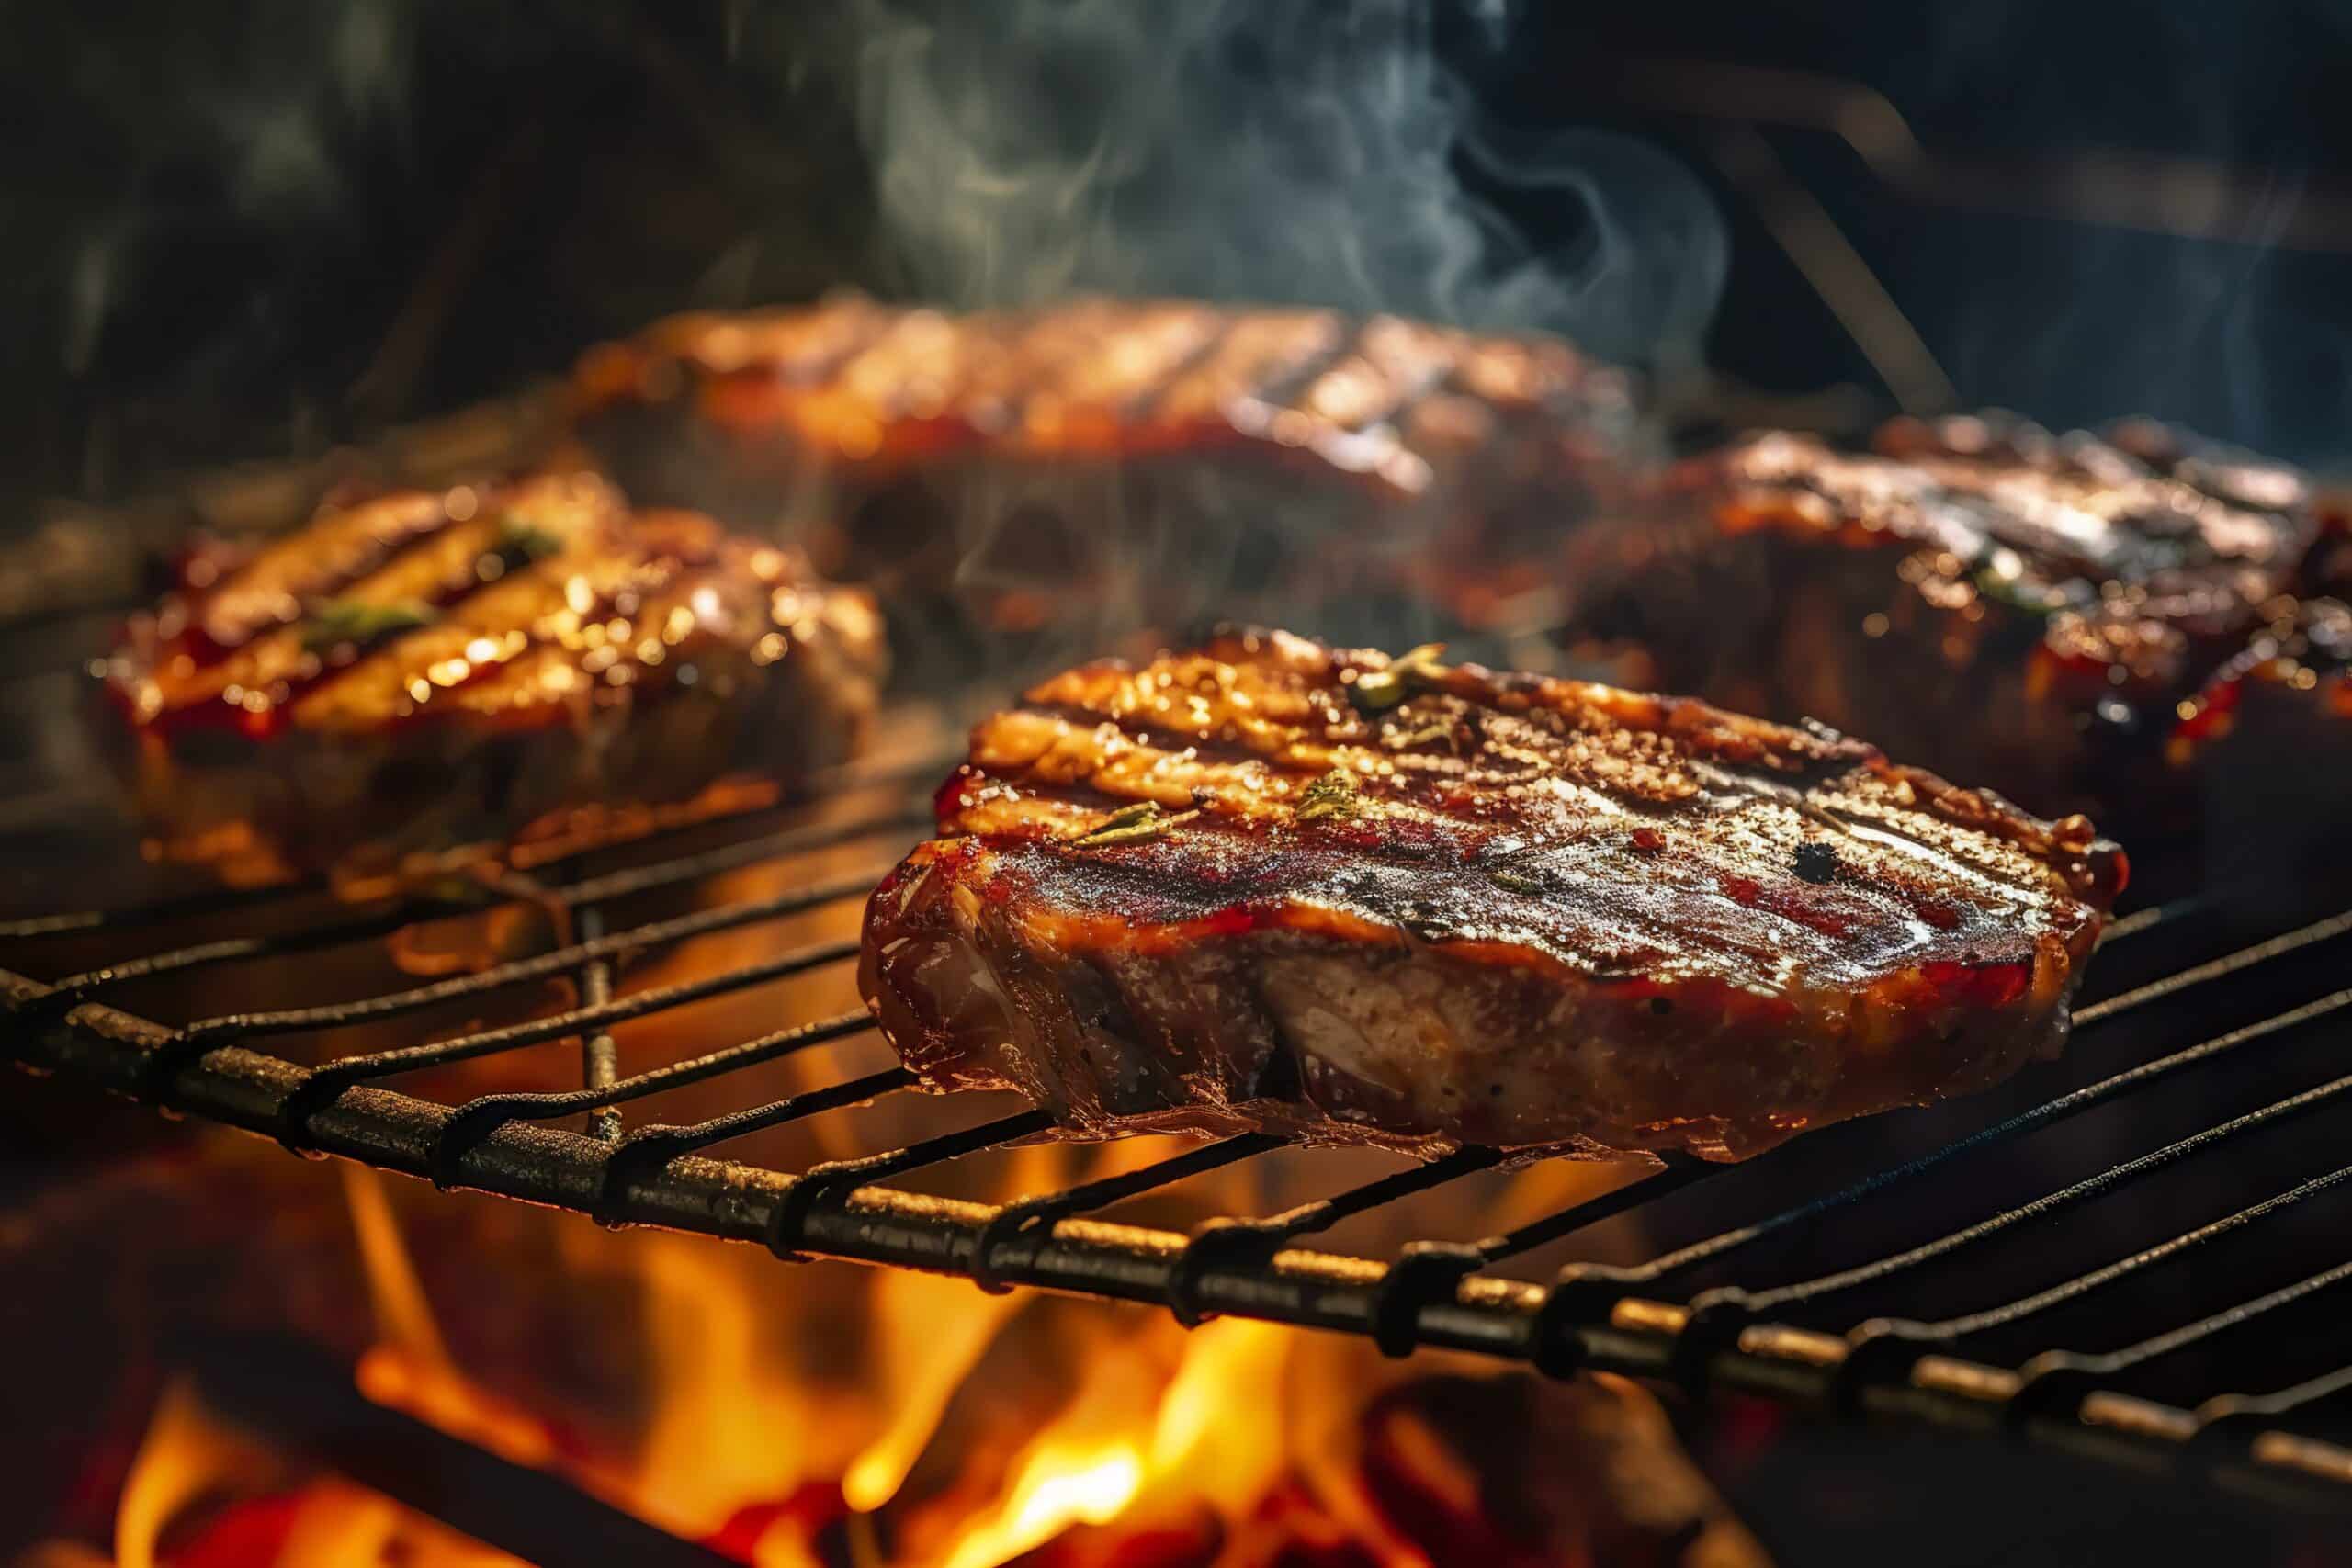 www.appr.com : How Long To Grill Ribs On Charcoal?